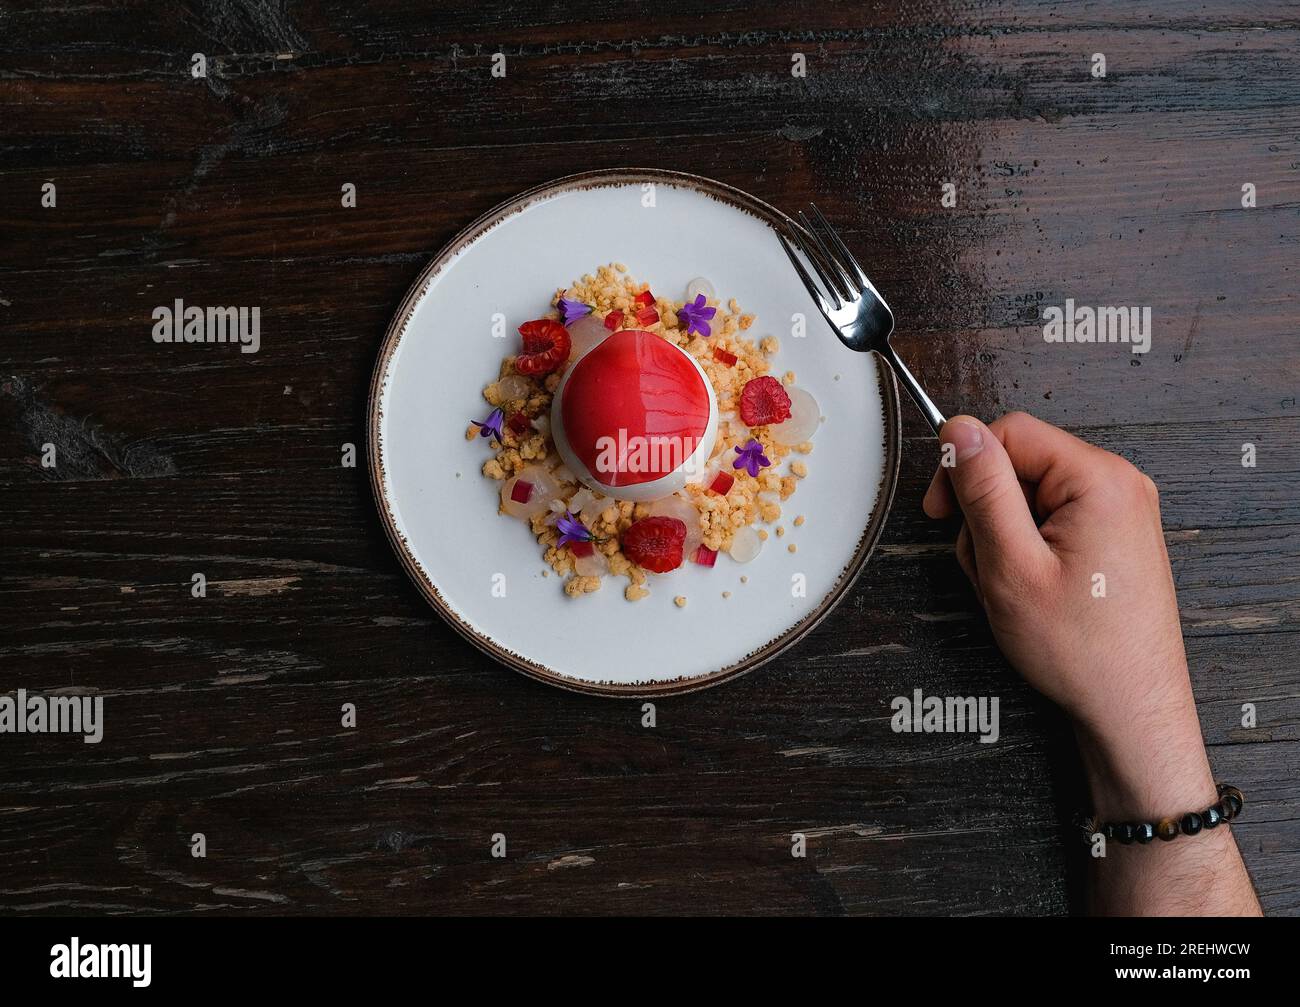 Creative Raspberry dessert plated on a white plate, with crunchy elements and a fork holding hand. Stock Photo